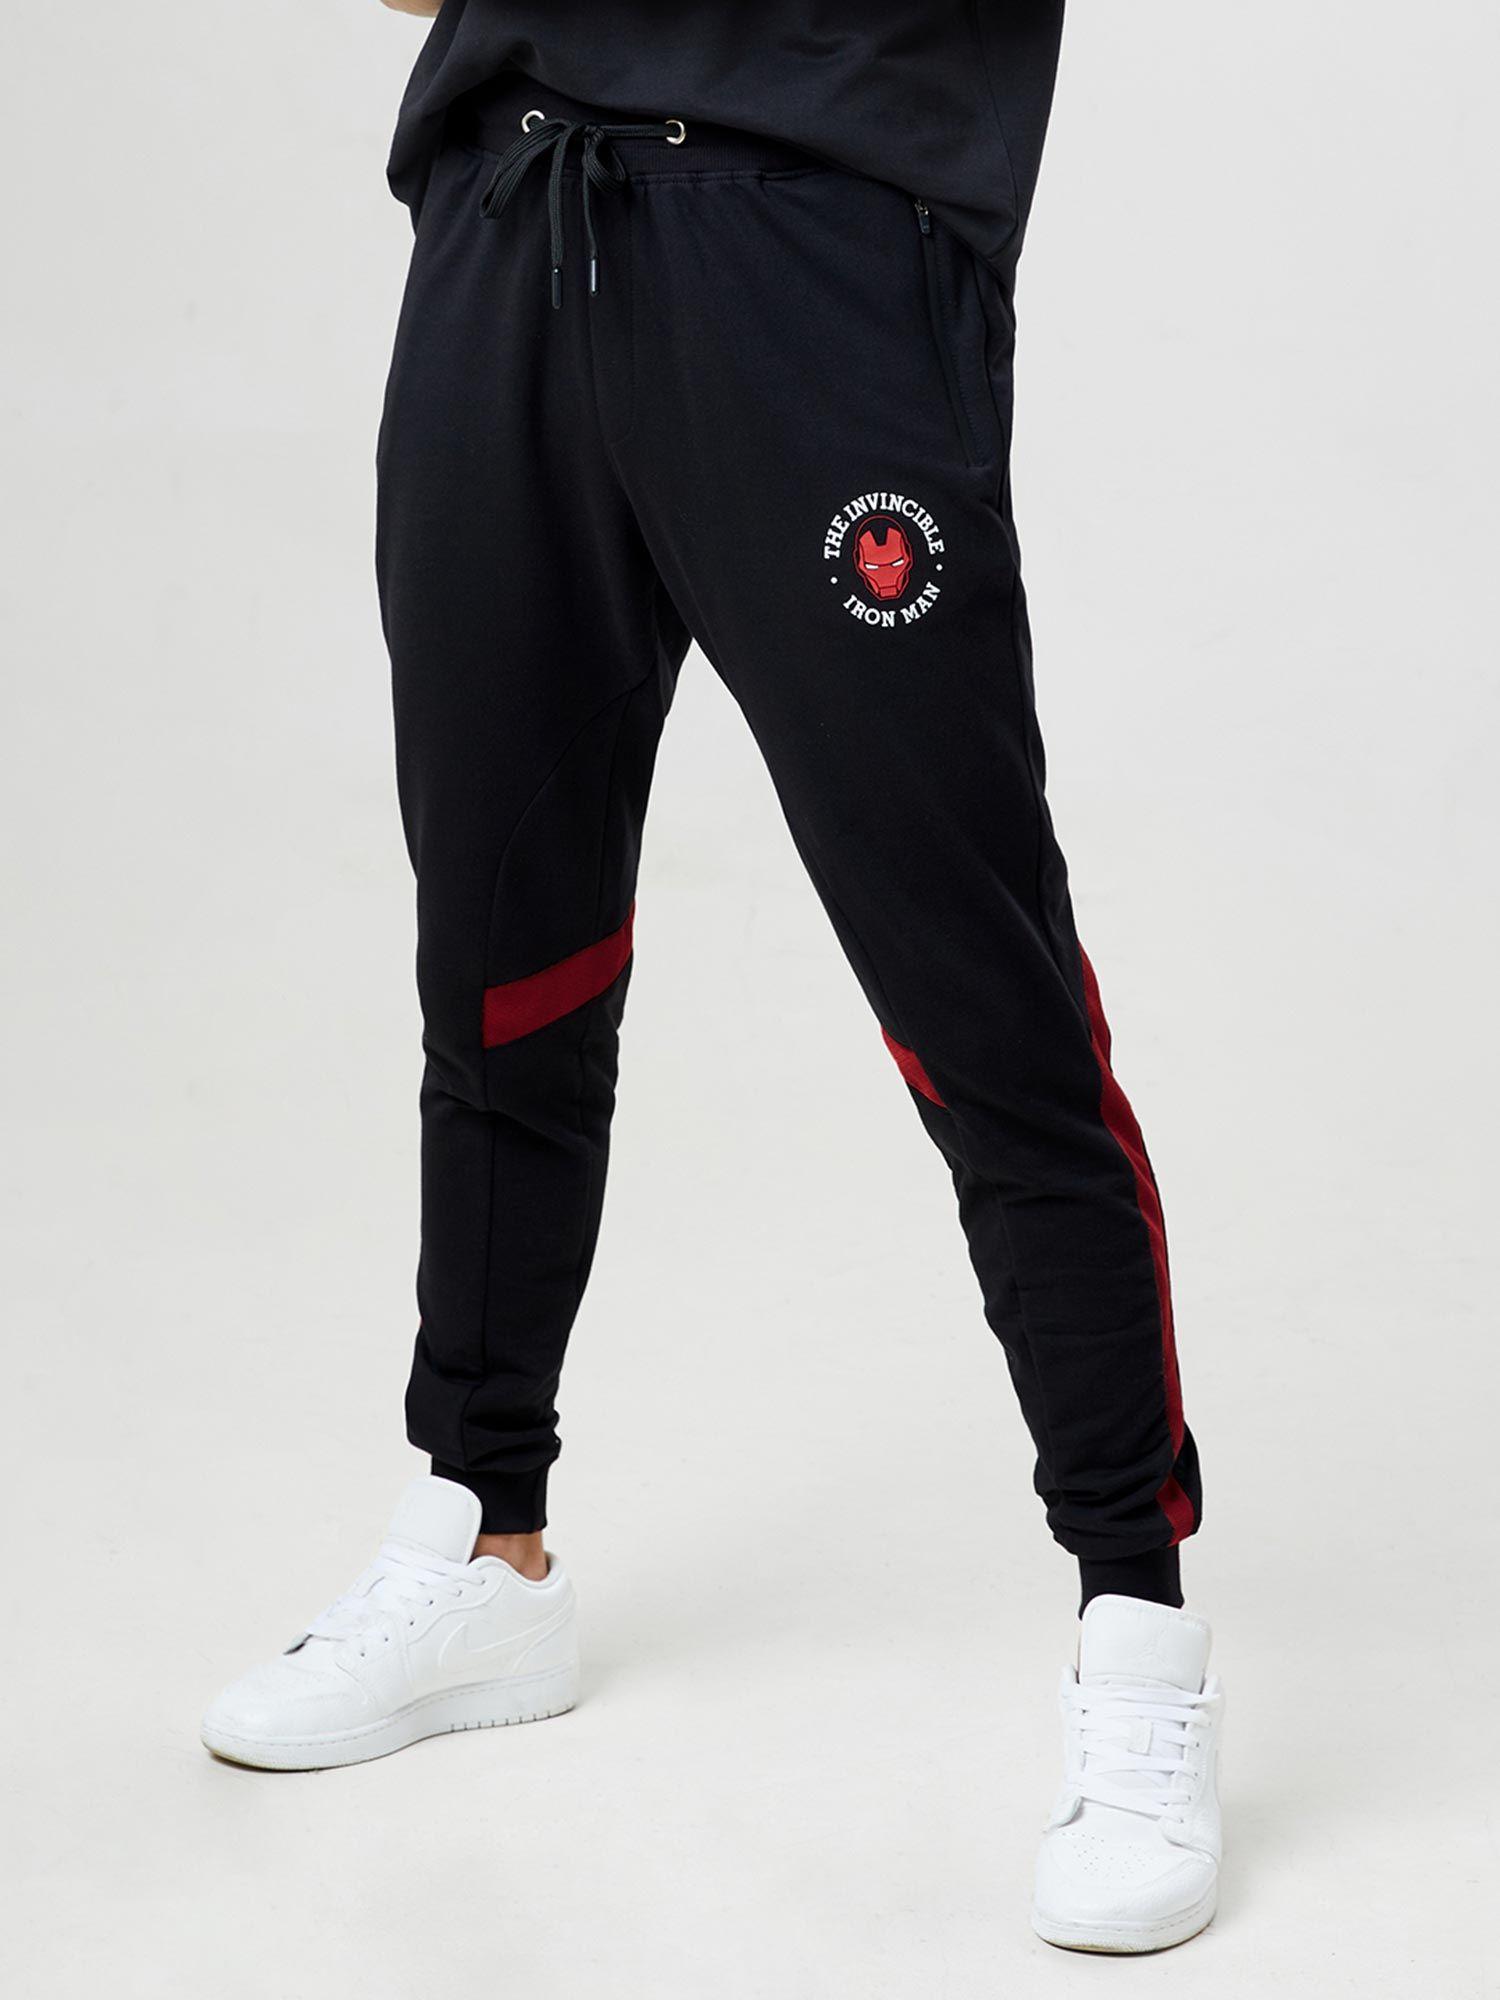 iron man the invincible joggers for men